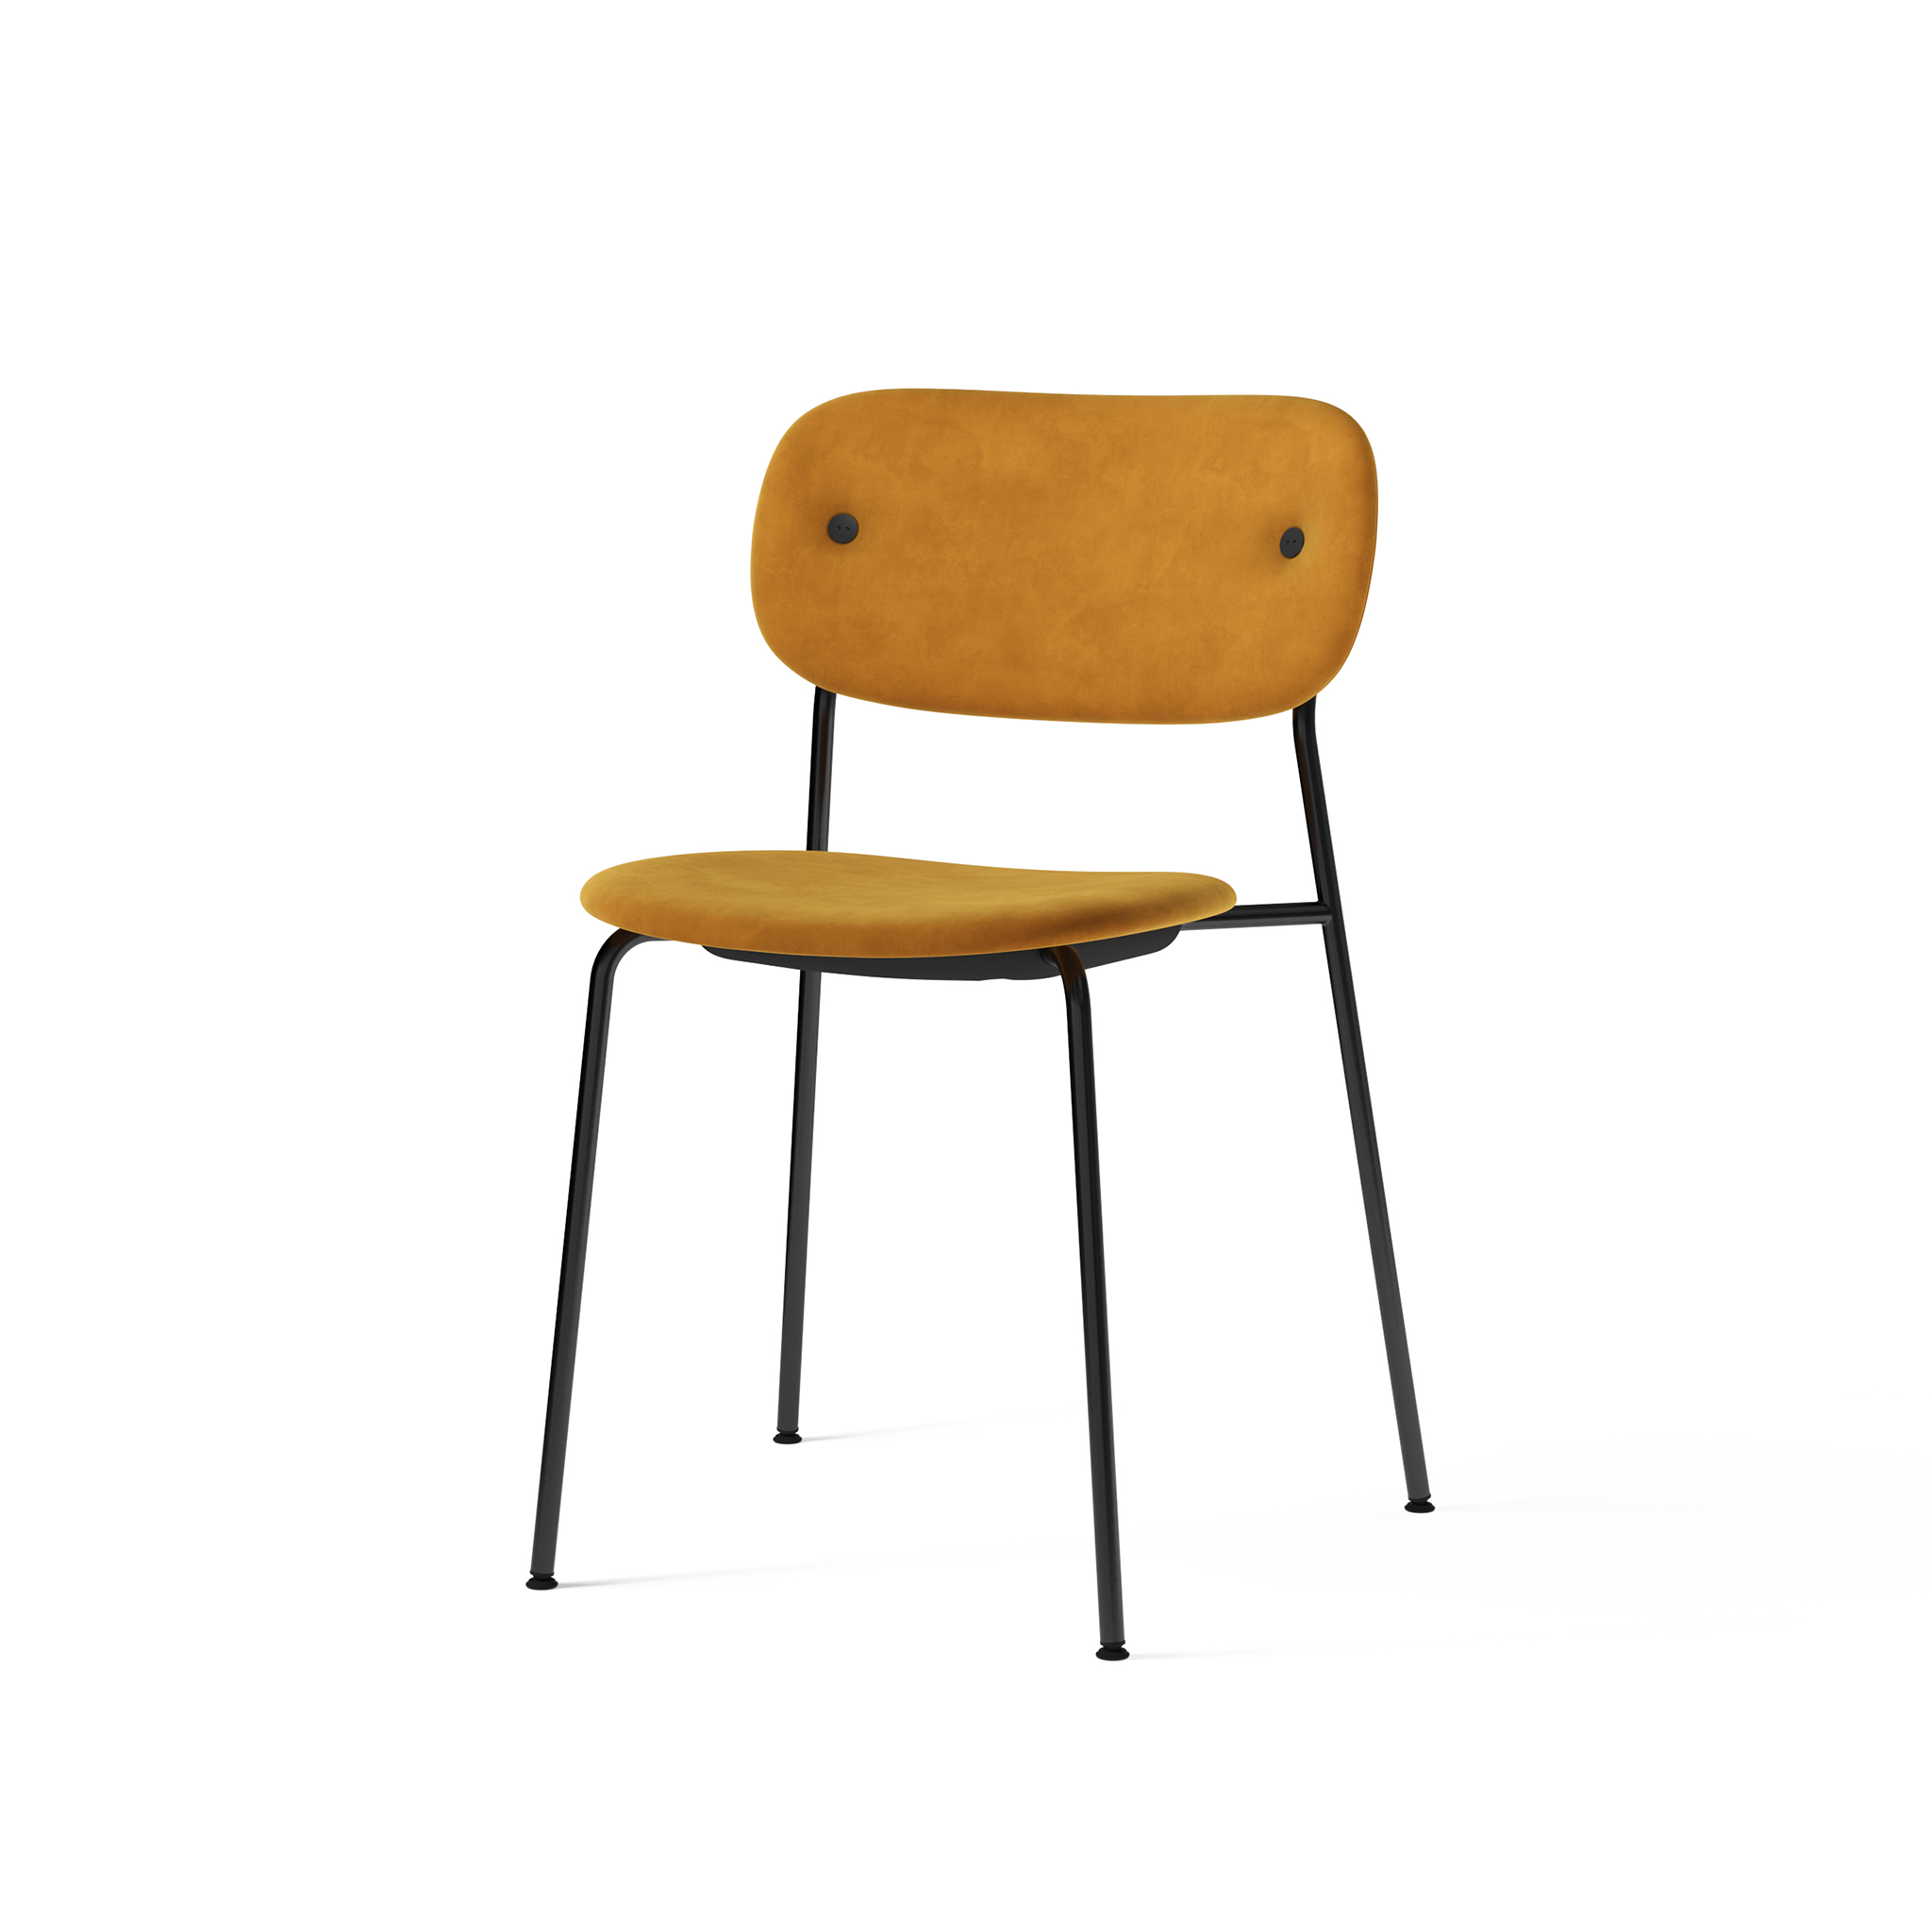 Co Chair, Fully Upholstered by Norm Architects & Els Van Hoorebeeck